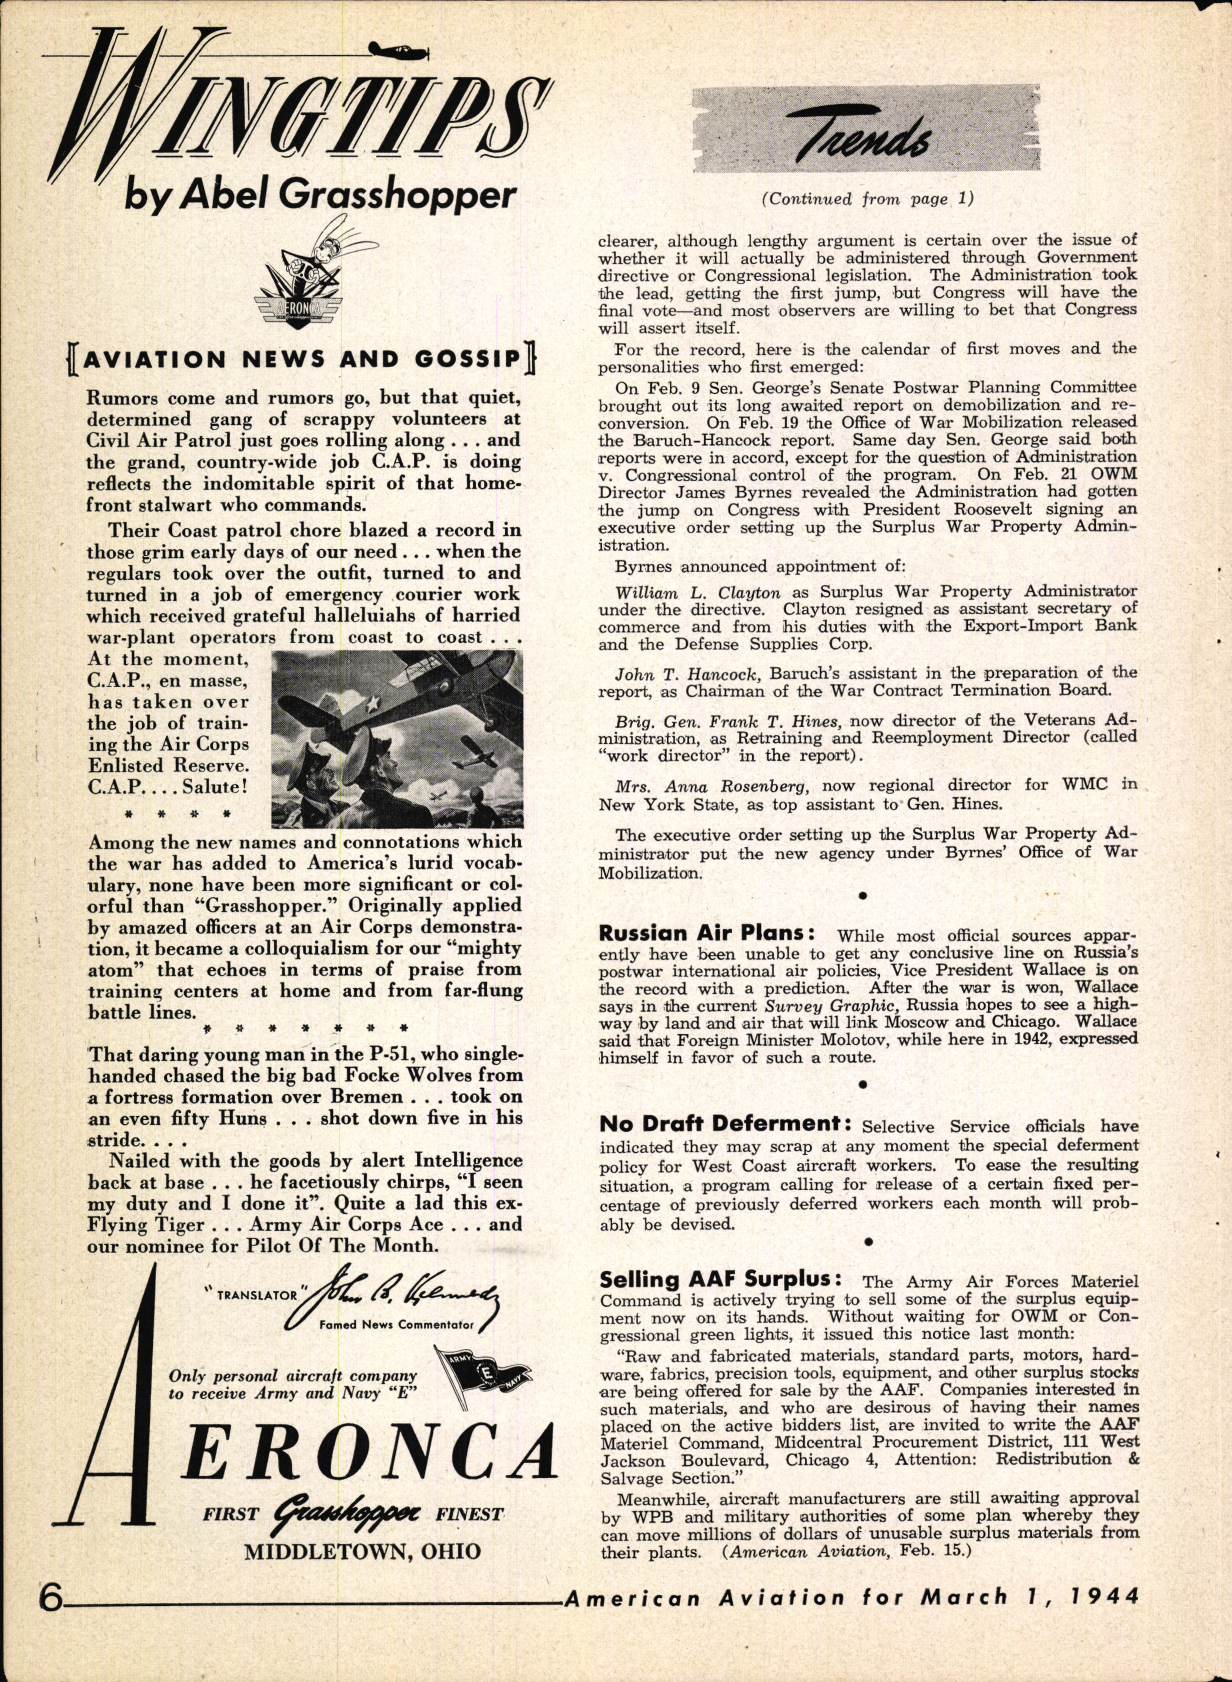 Sample page 6 from AirCorps Library document: American Aviation Magazine - Volume 7 - No. 19